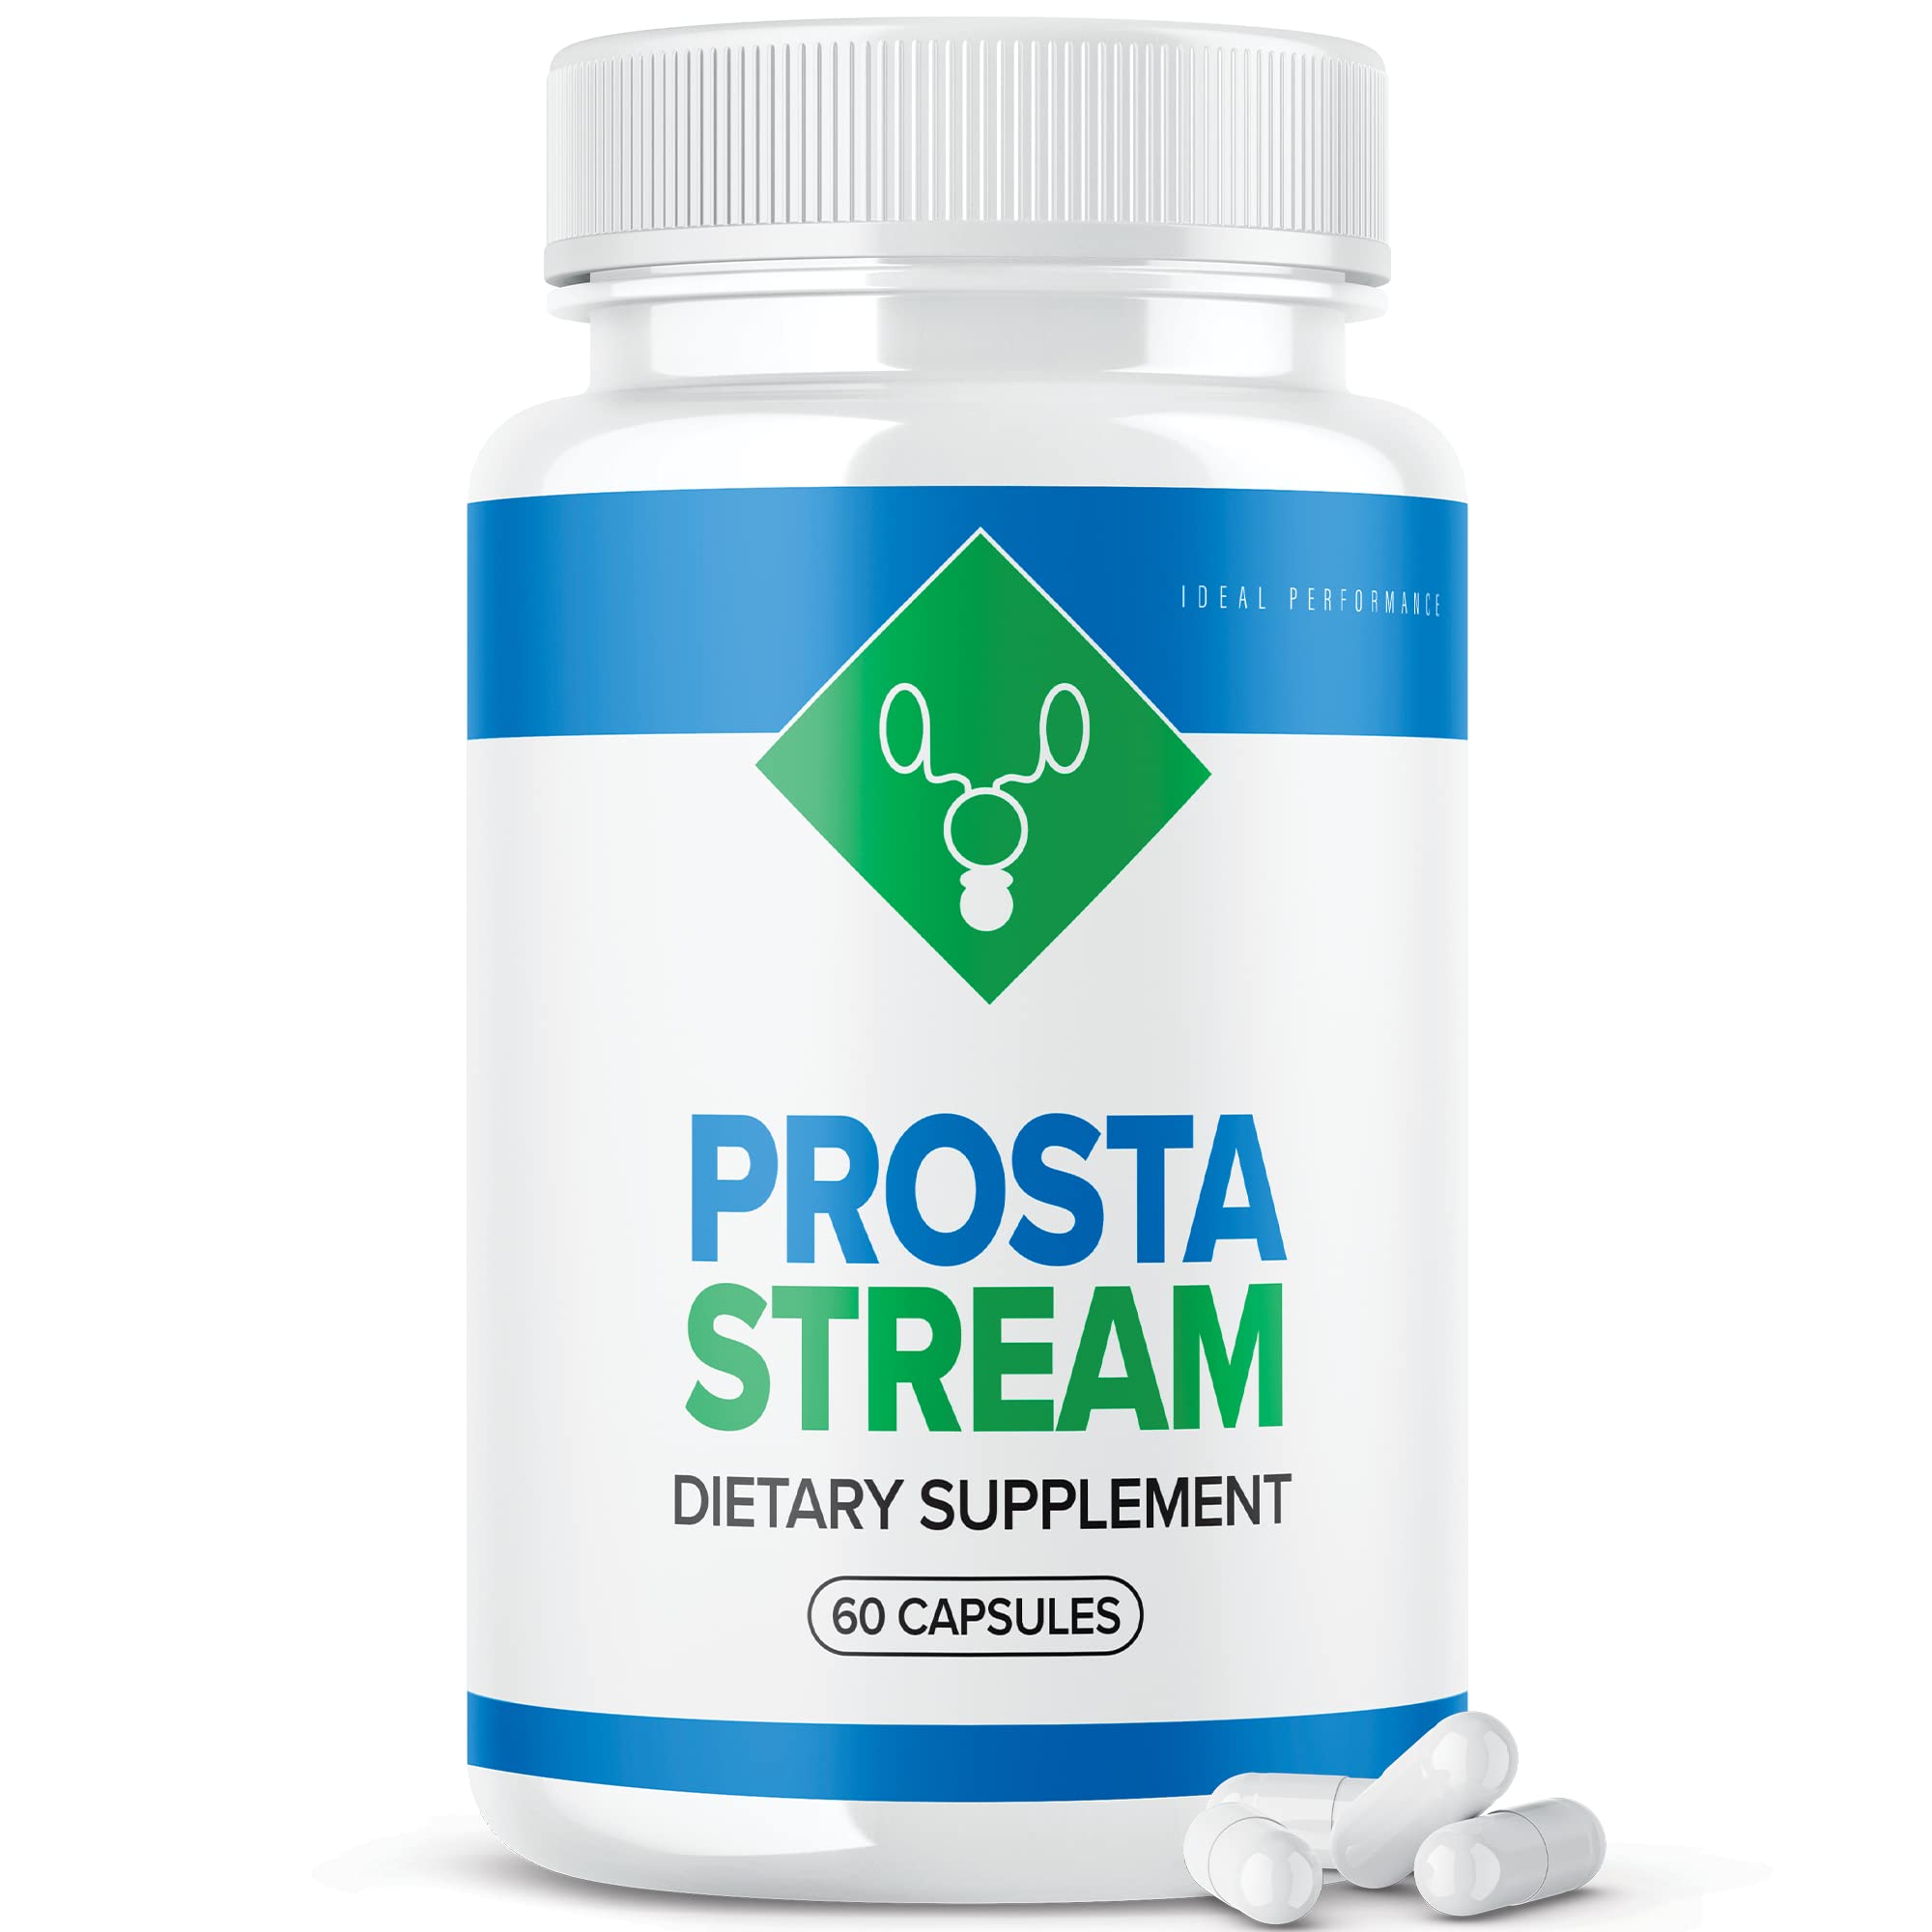 what is in prostastream